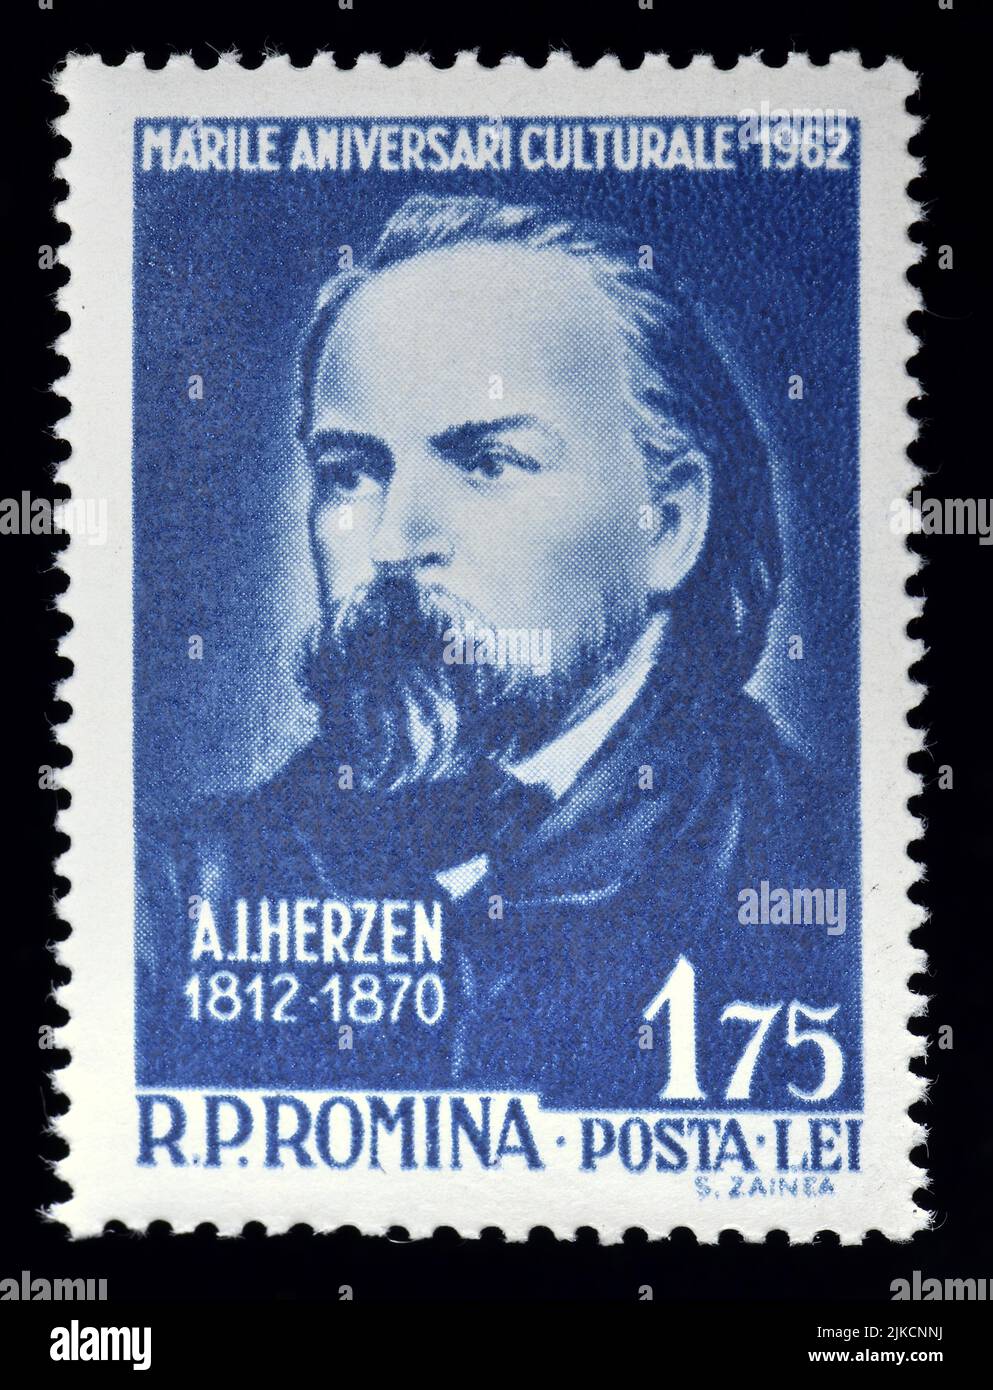 Romanian postage stamp (1962) : Aleksandr Ivanovich Herzen (1812-1870) Russian writer and thinker known as the 'father of Russian socialism' Stock Photo